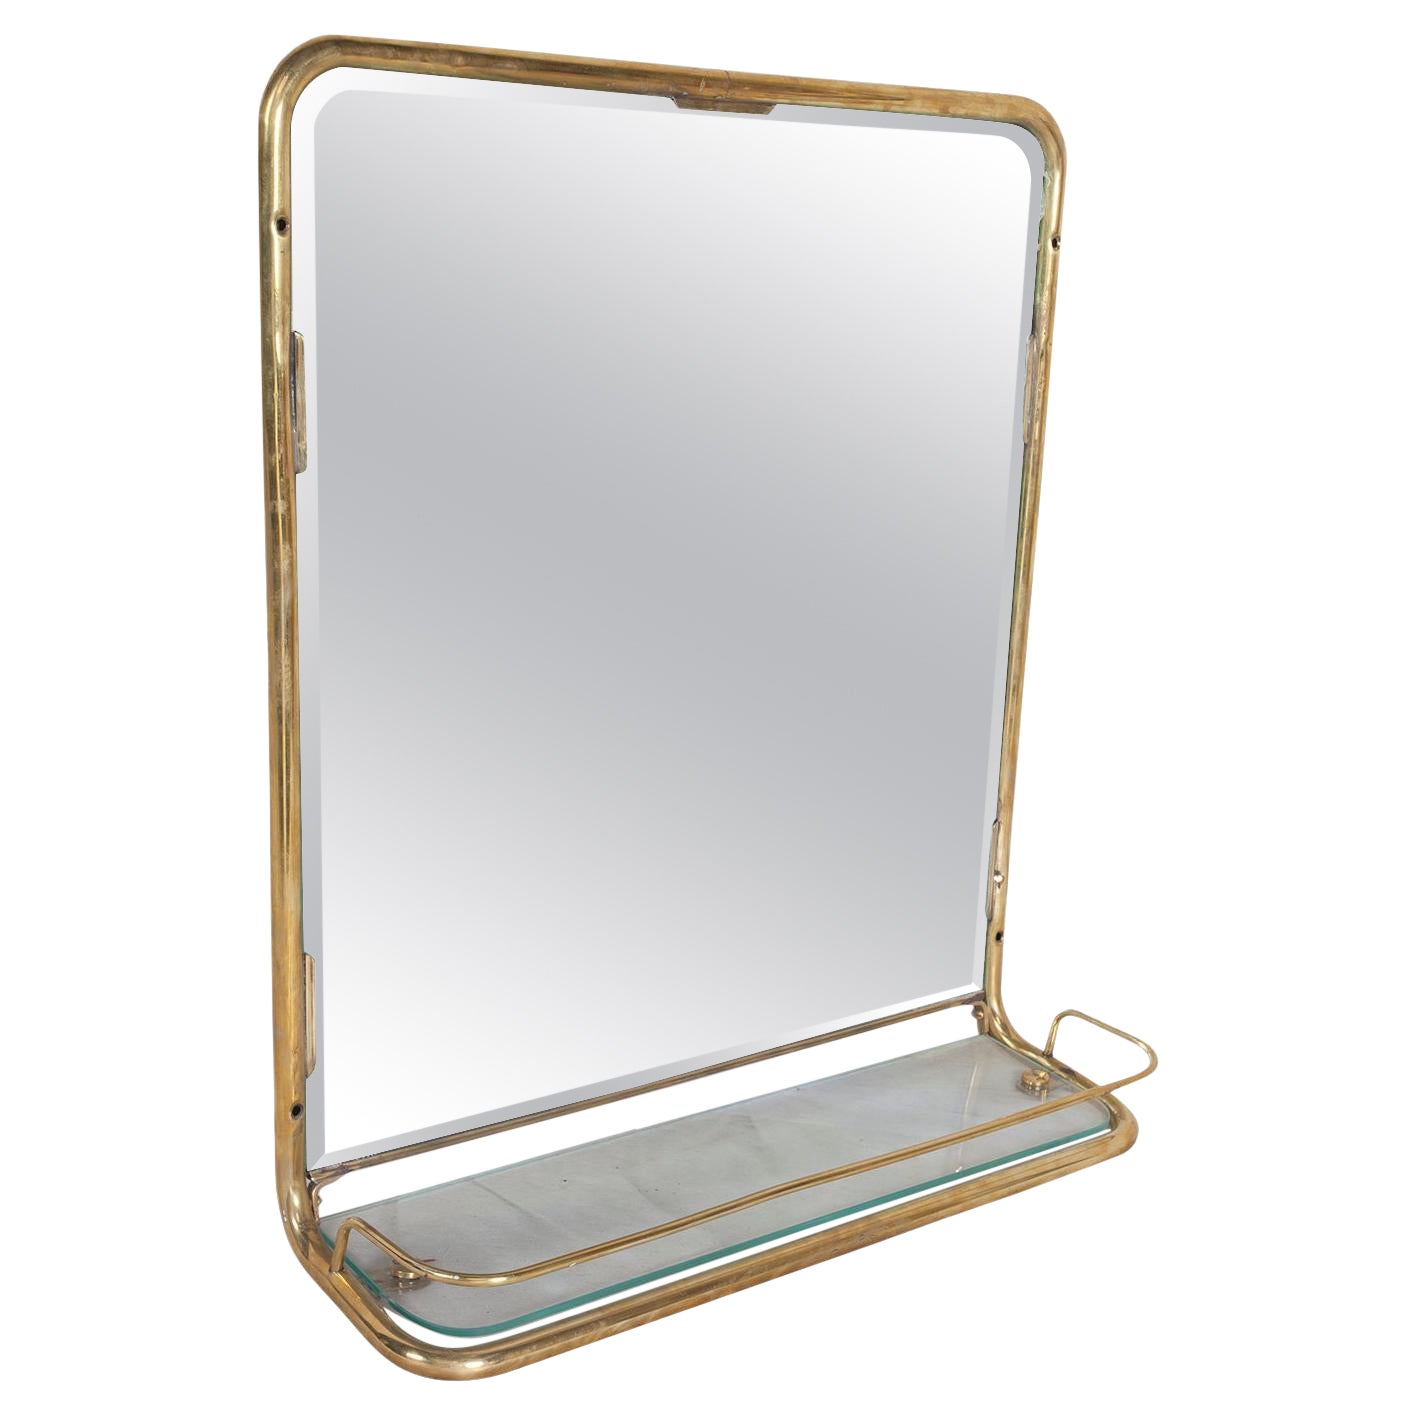 Nautical Brass Mirror from a Ship's Stateroom, circa 1960s